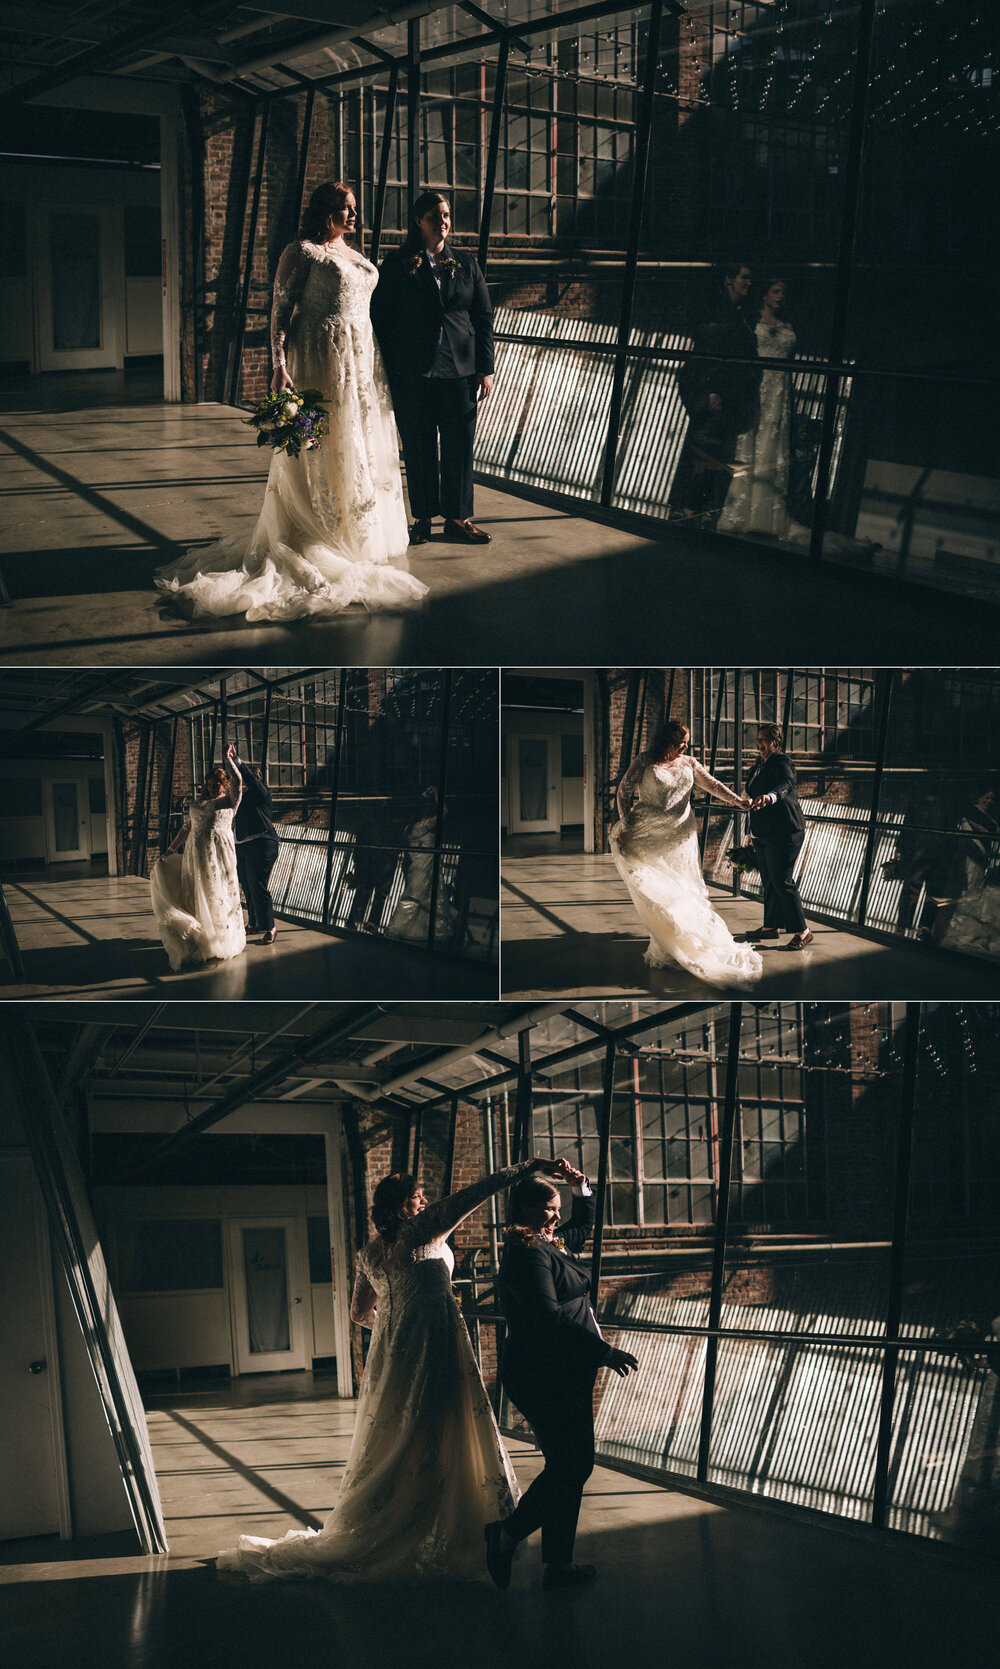  In this collage of four images, the couple stands in an industrial walkway in front of a large row of windows. There is harsh sunlight coming from the right of the frame causing dramatic lines and shadows. In the first image, they have serious faces